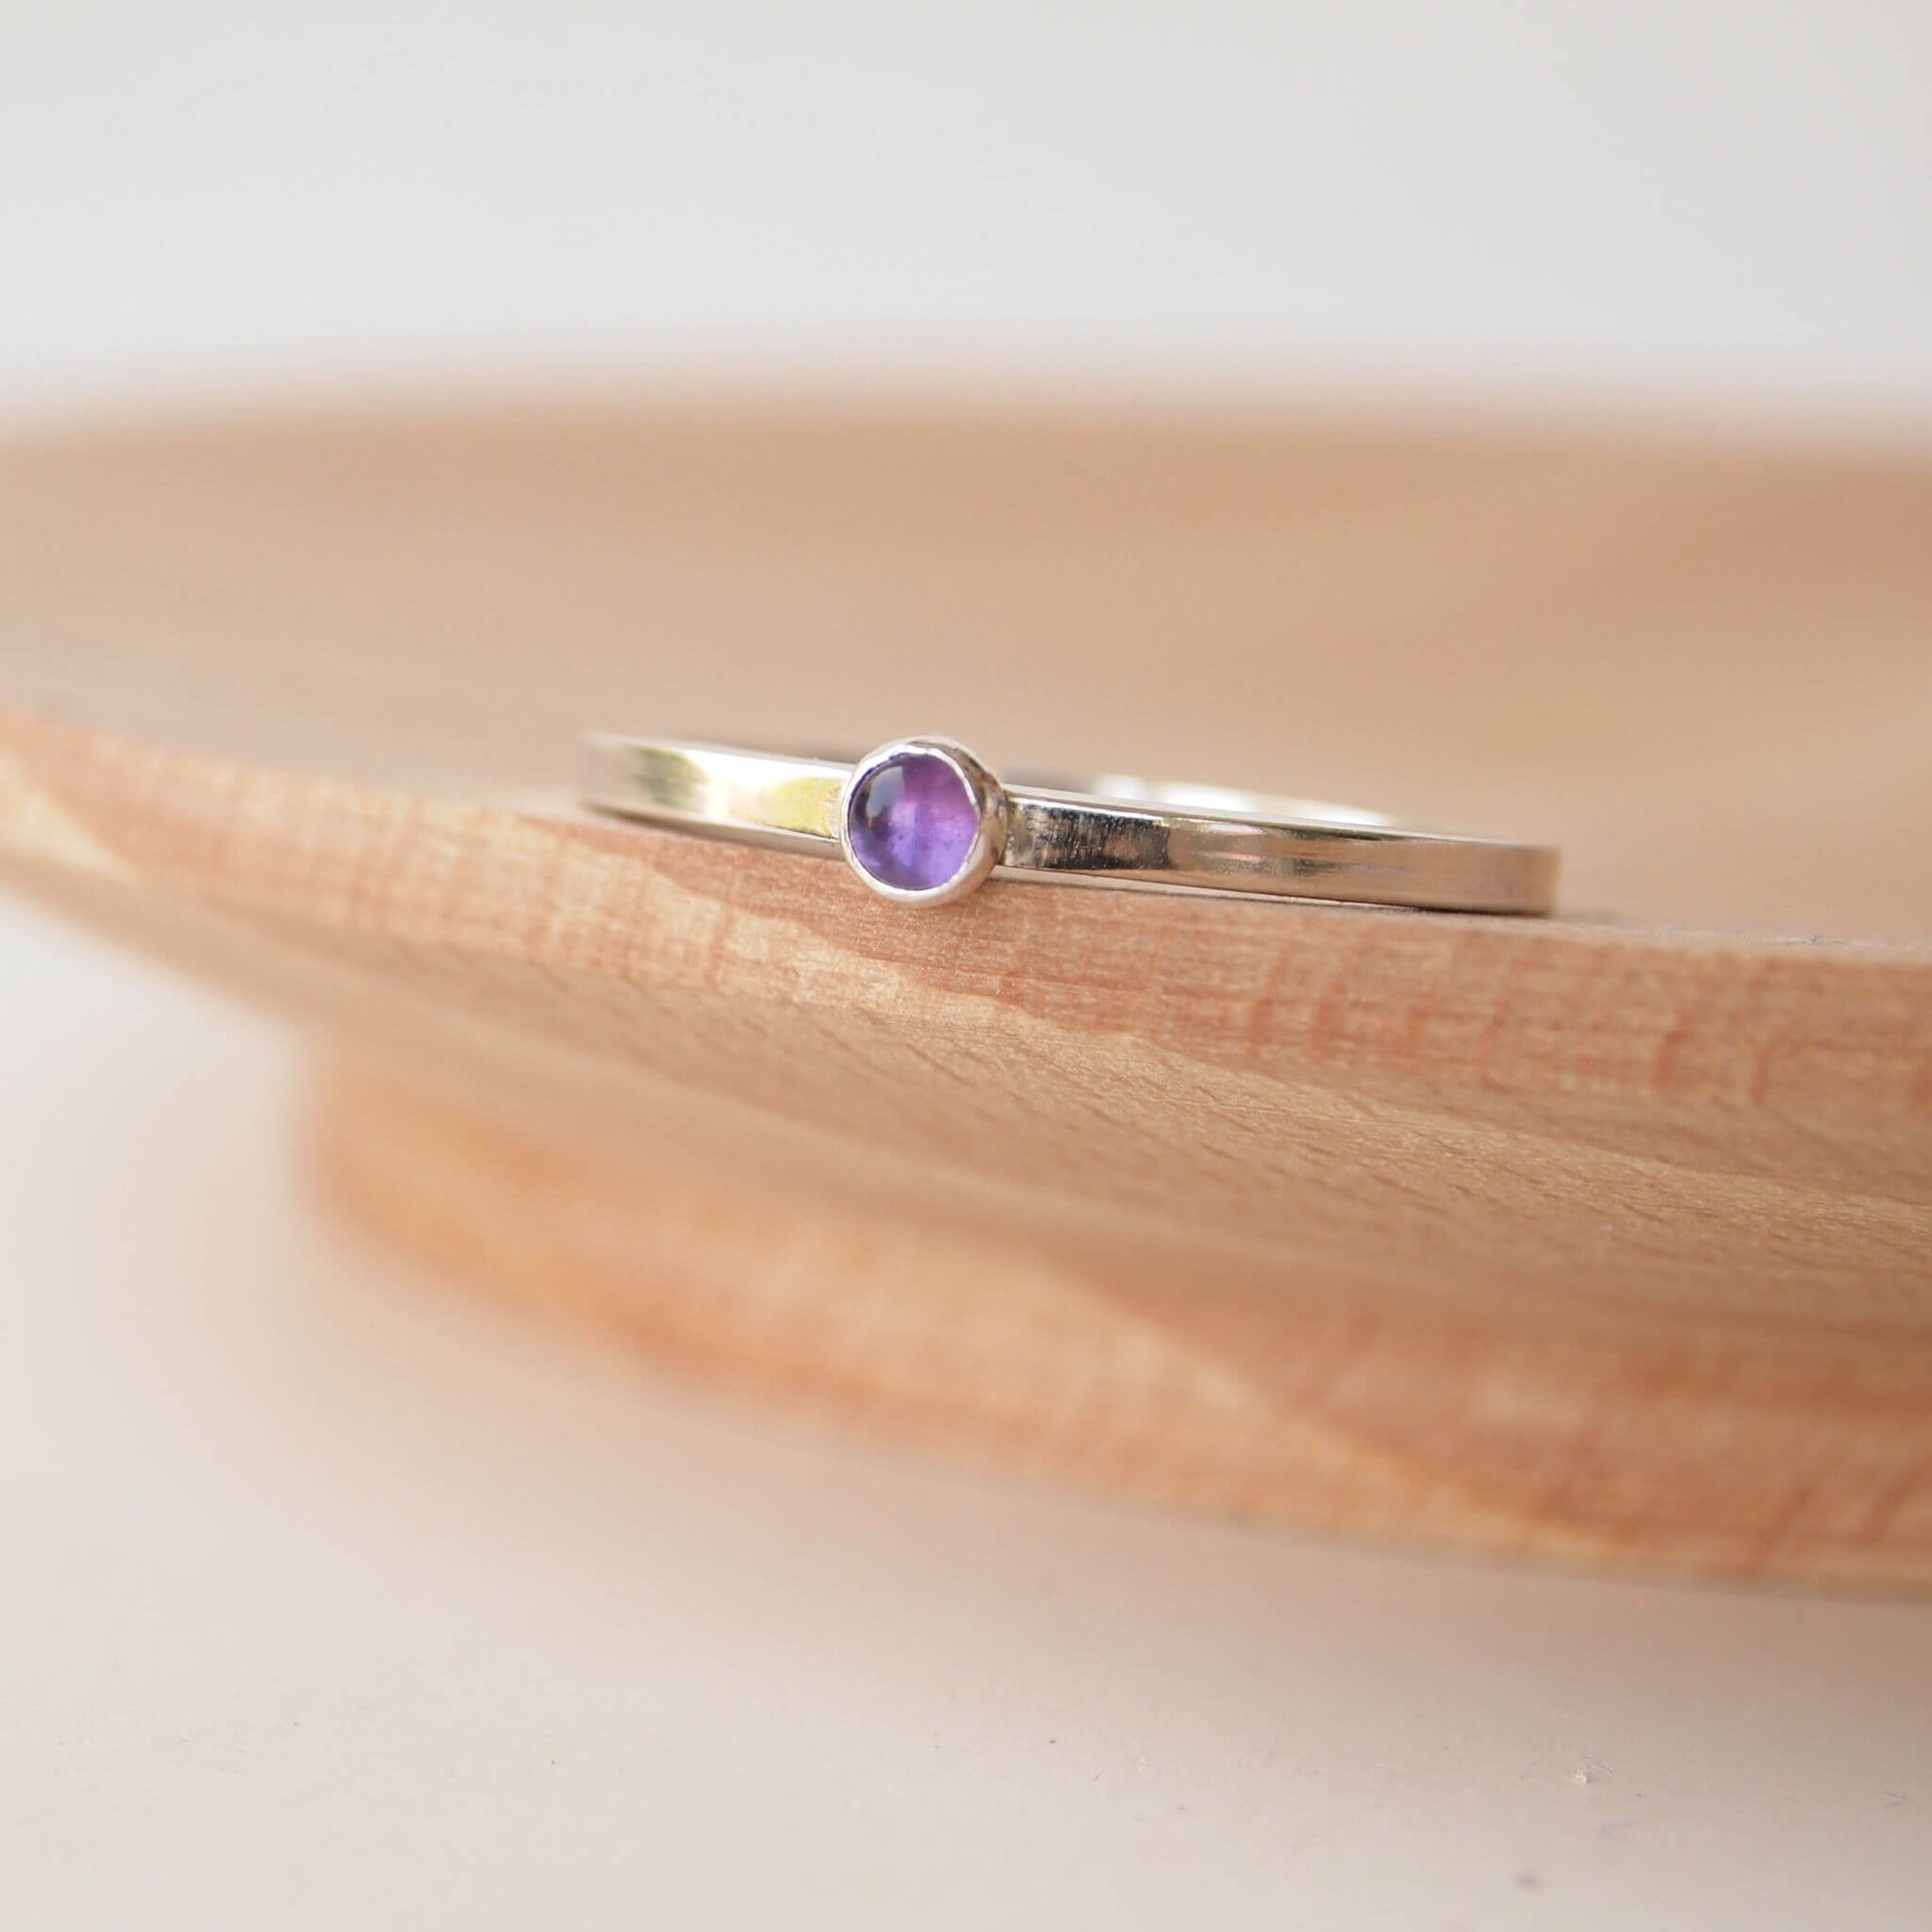 Amethyst and Sterling Silver Ring made from a small 3mm round deep purple Amethyst gemstone set simply onto a modern band of square wire. Handmade to your ring size by maram jewellery in Scotland